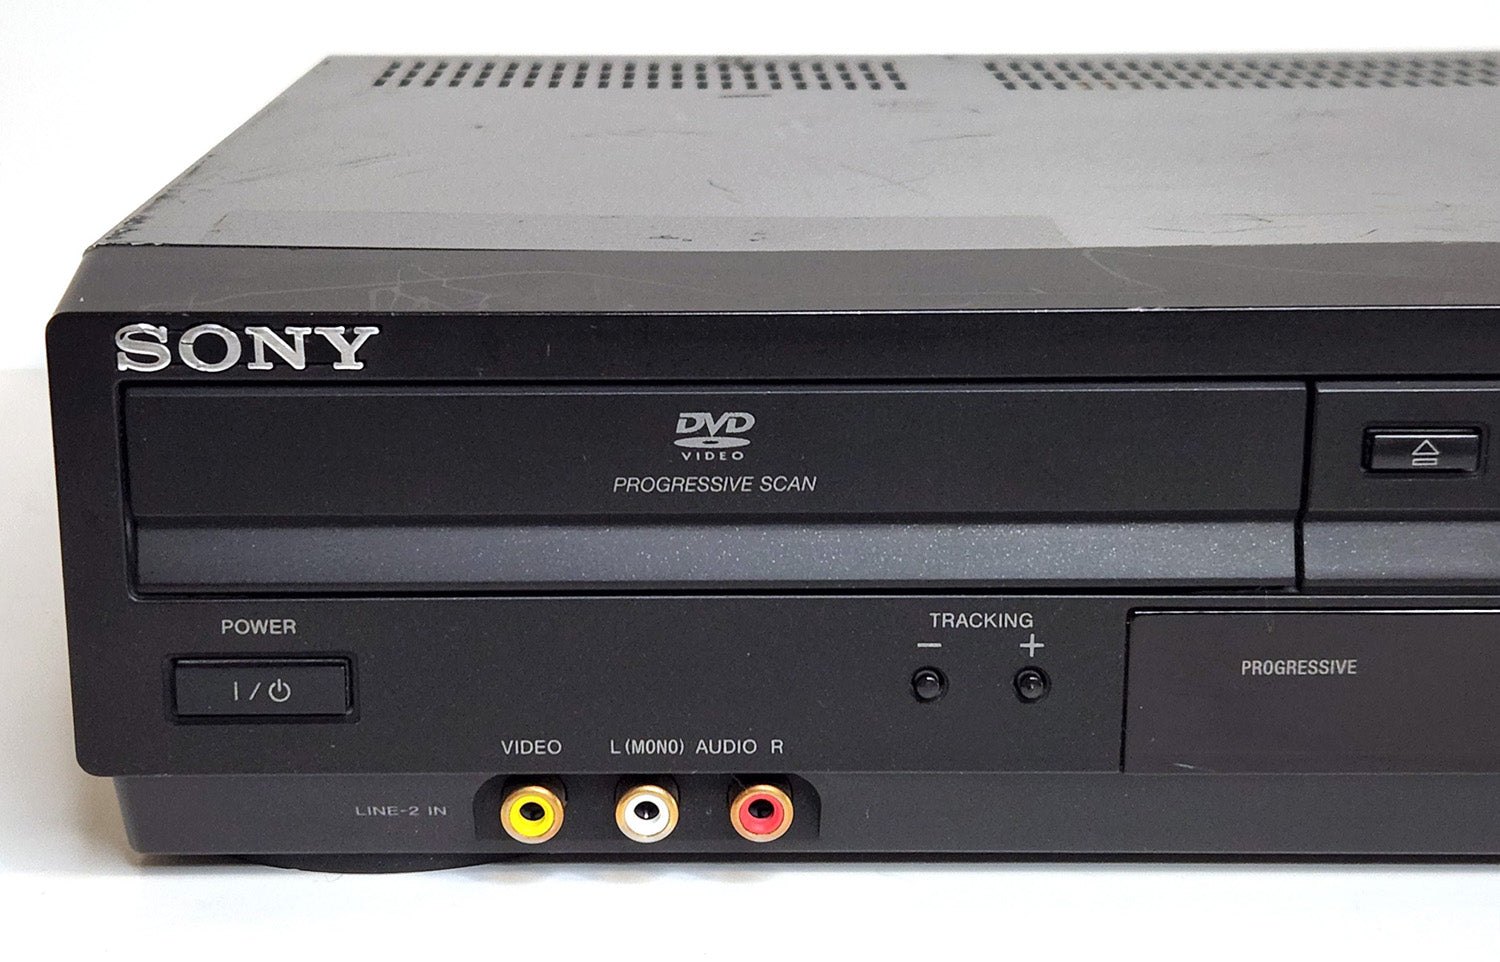 Sony SLV-D380P VCR/DVD Player Combo - Left